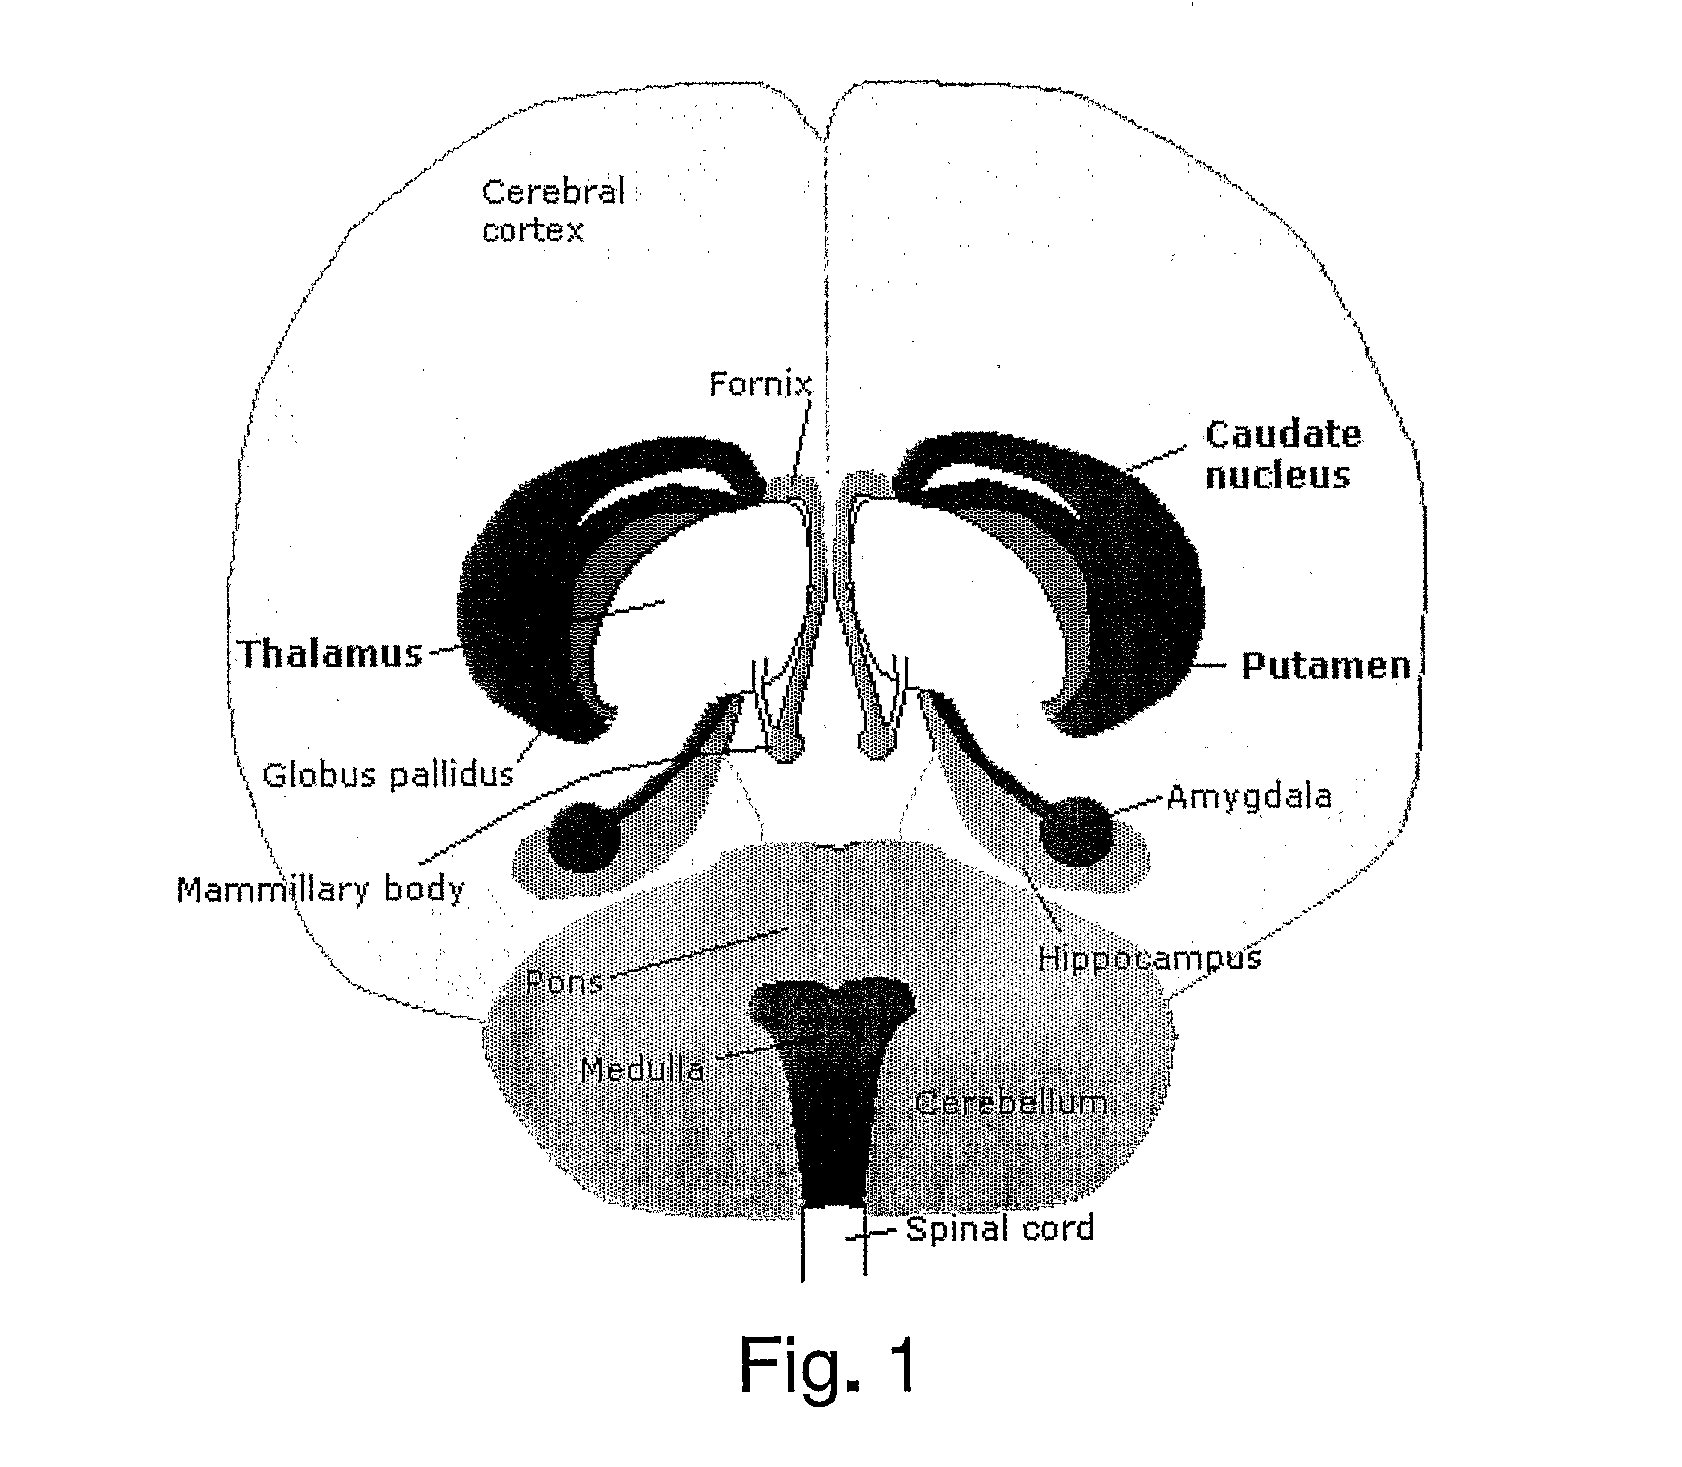 System and method for volumetric analysis of medical images